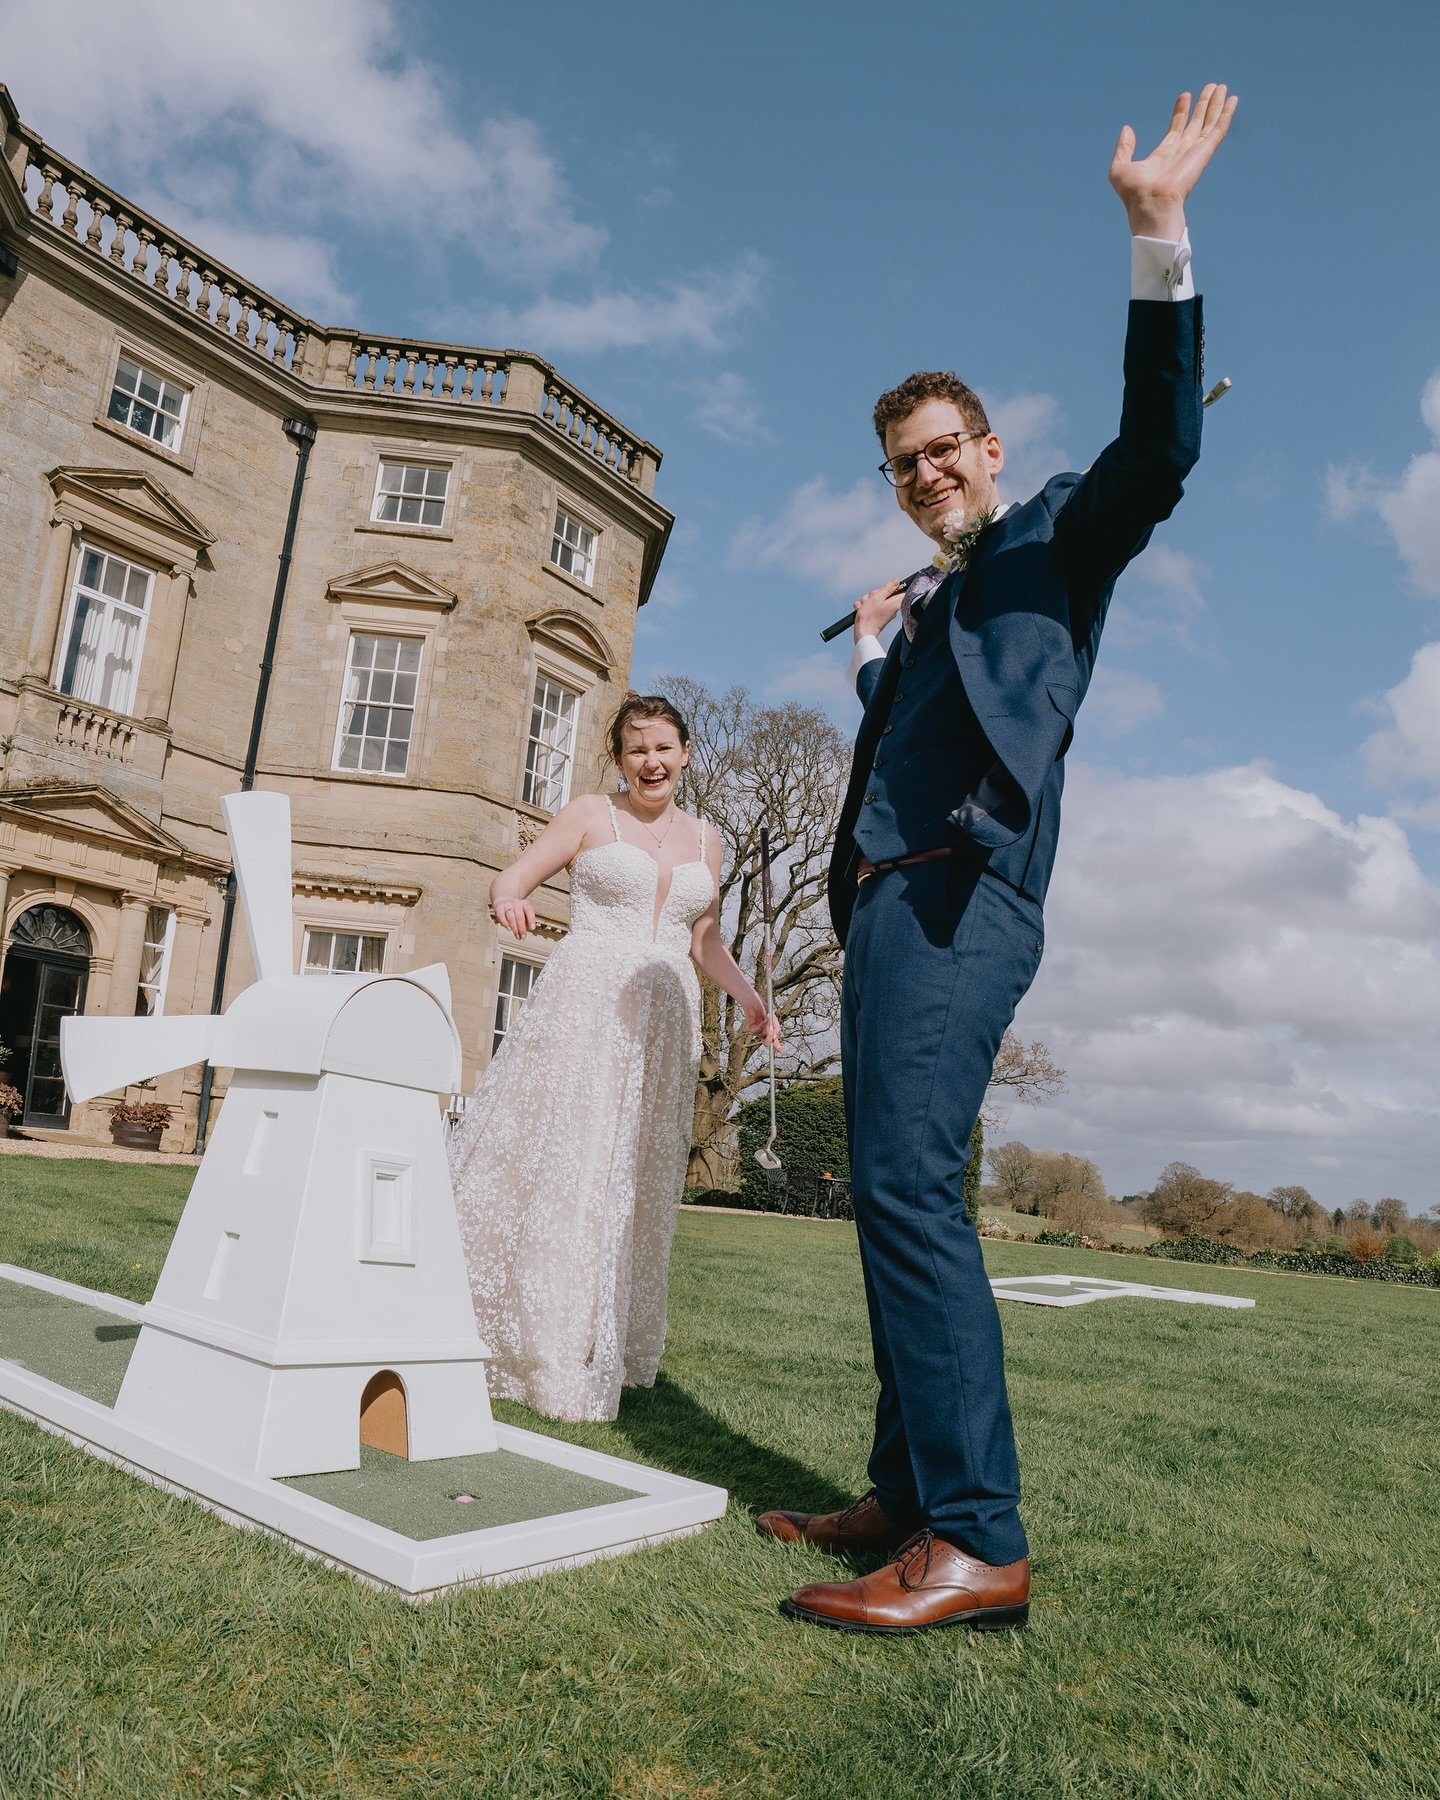 Hannah &amp; Corty, your wedding gallery is finished! 🎉🤍✨

Tomorrow, Cal and I are photographing &amp; filming Jane &amp; Alex&rsquo;s wedding day, we can&rsquo;t wait! 🎥📸

@bourtonhall 

#wedding #weddingphotography #weddingphotographer #wedding